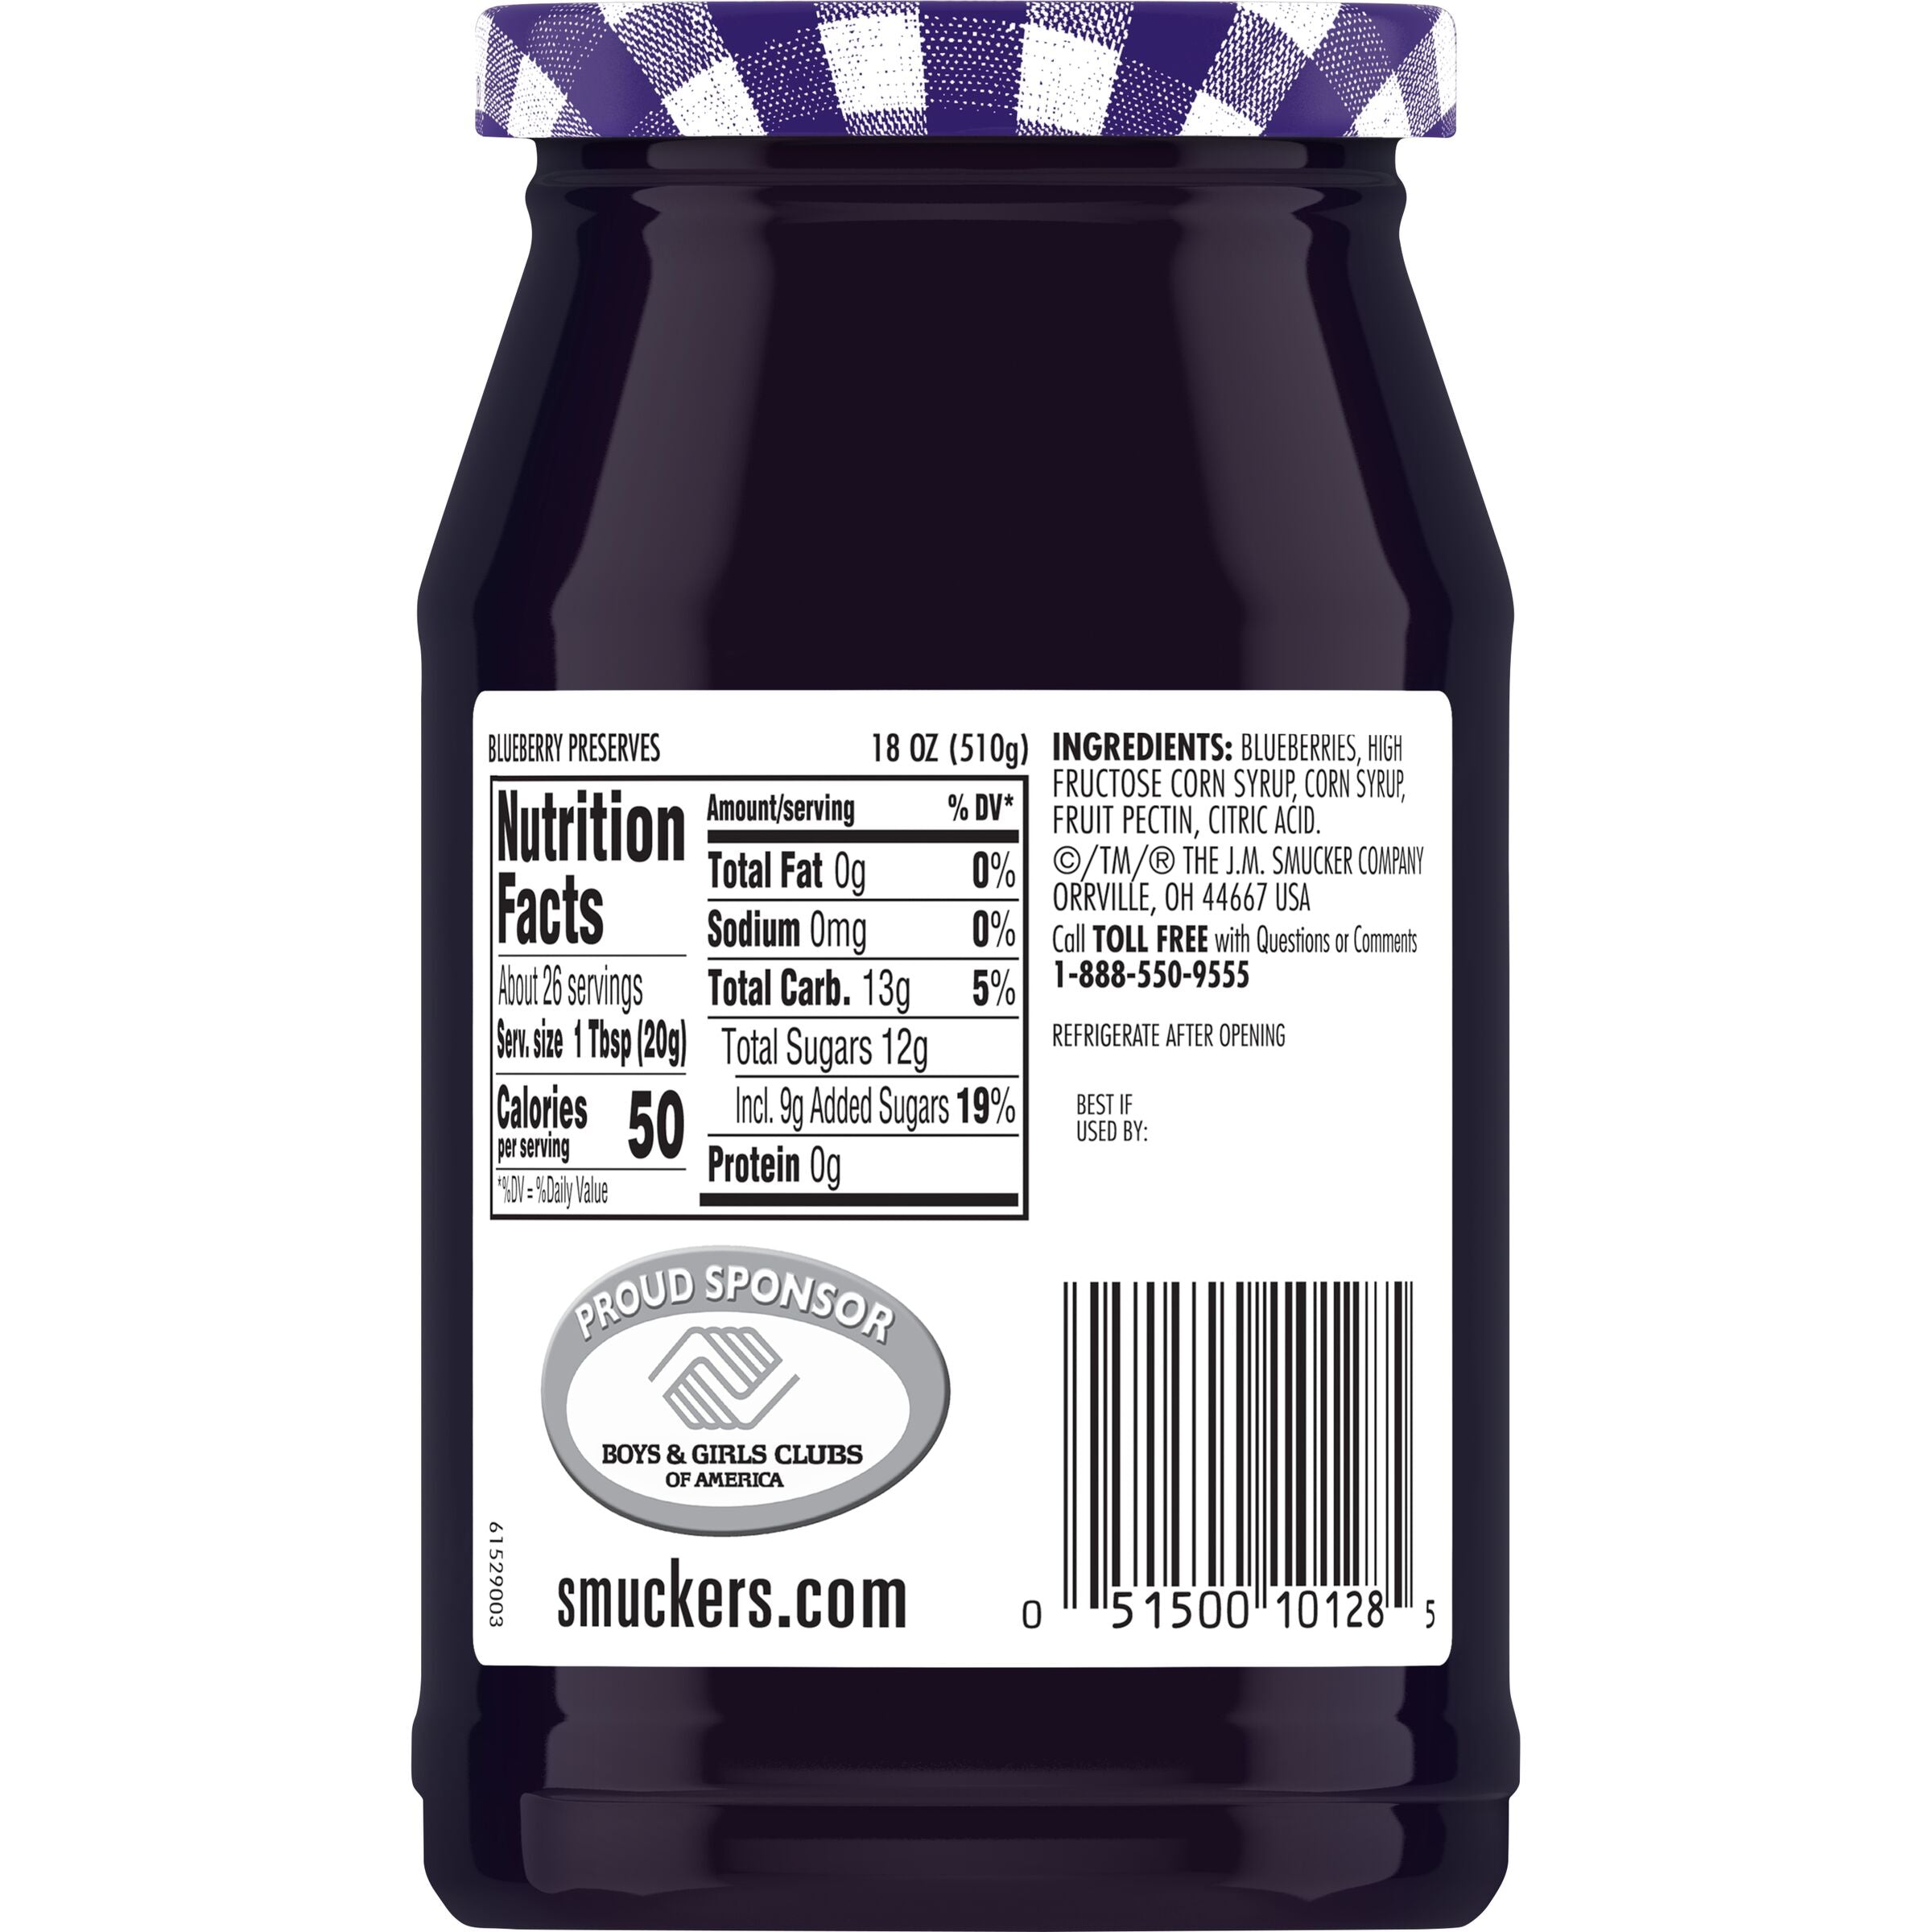 SMUCKER’S BLUEBERRY PRESERVES - My American Shop